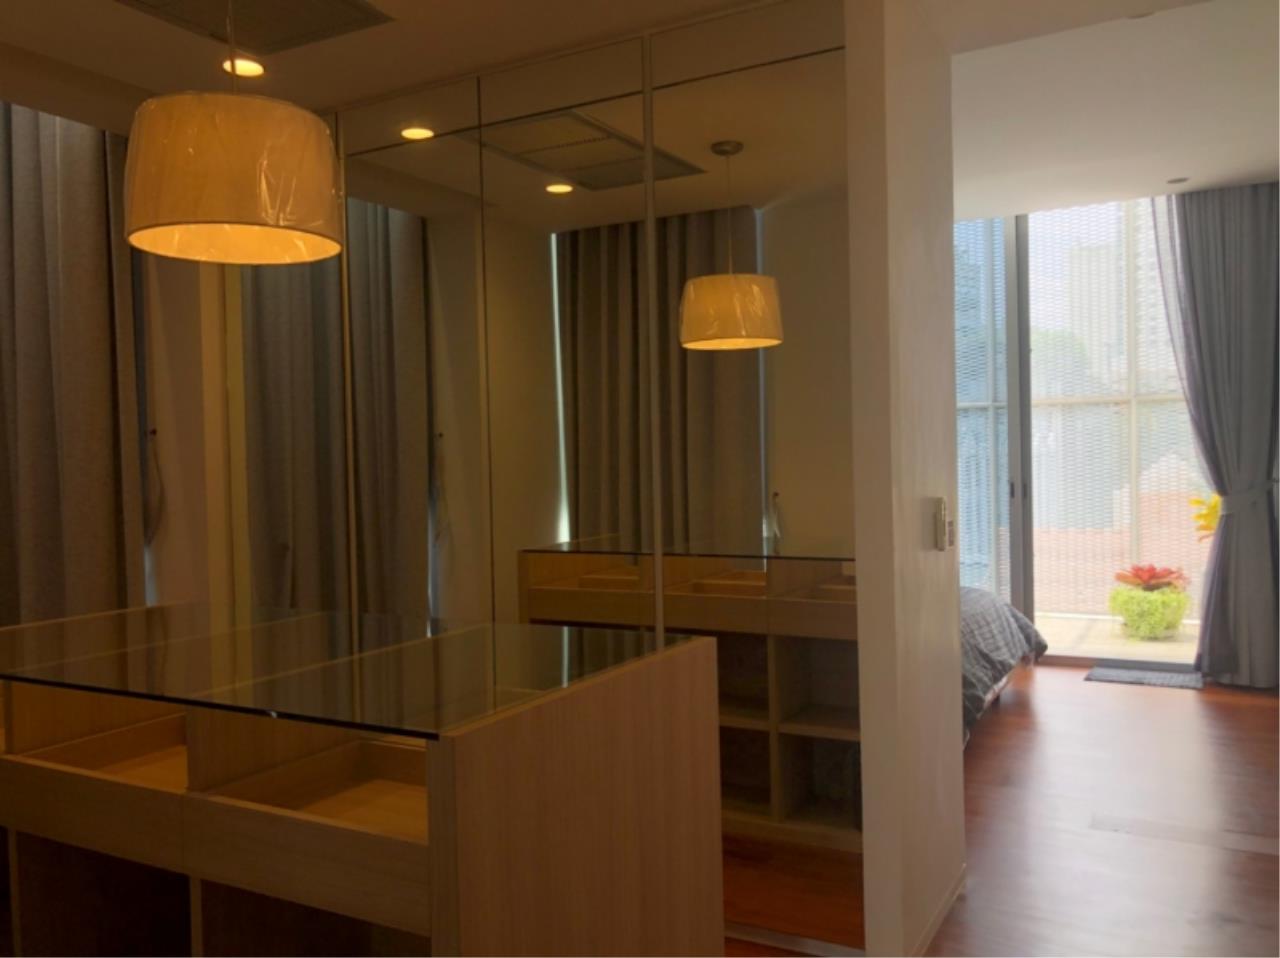 Century21 Skylux Agency's 33 Serviced Apartment / Apartment (Serviced) For Rent / 2 Bedroom / 110 SQM / BTS Asok / Bangkok 11